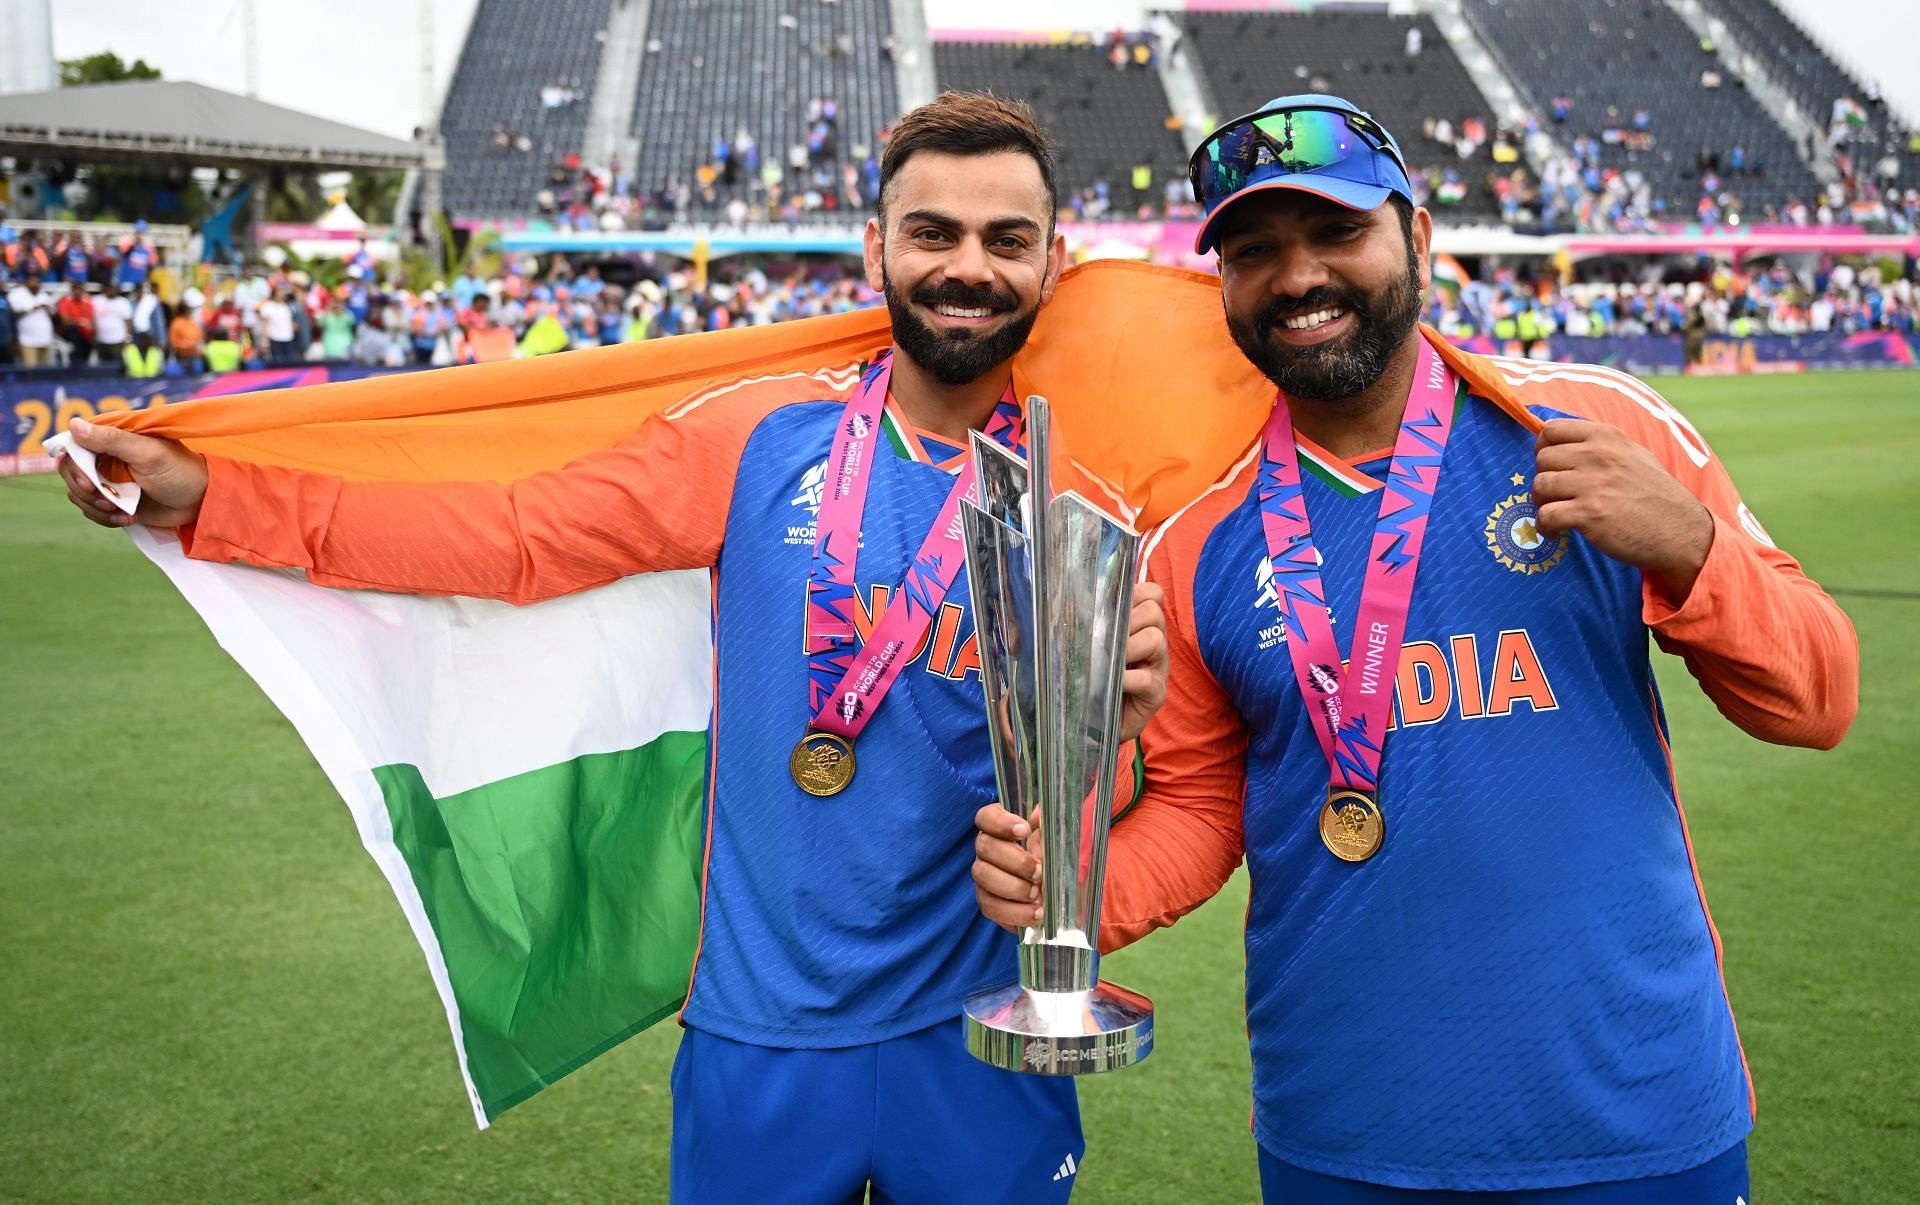 [Watch] Virat Kohli and Rohit Sharma dance together in joy at Wankhede Stadium during 2024 T20 World Cup celebrations